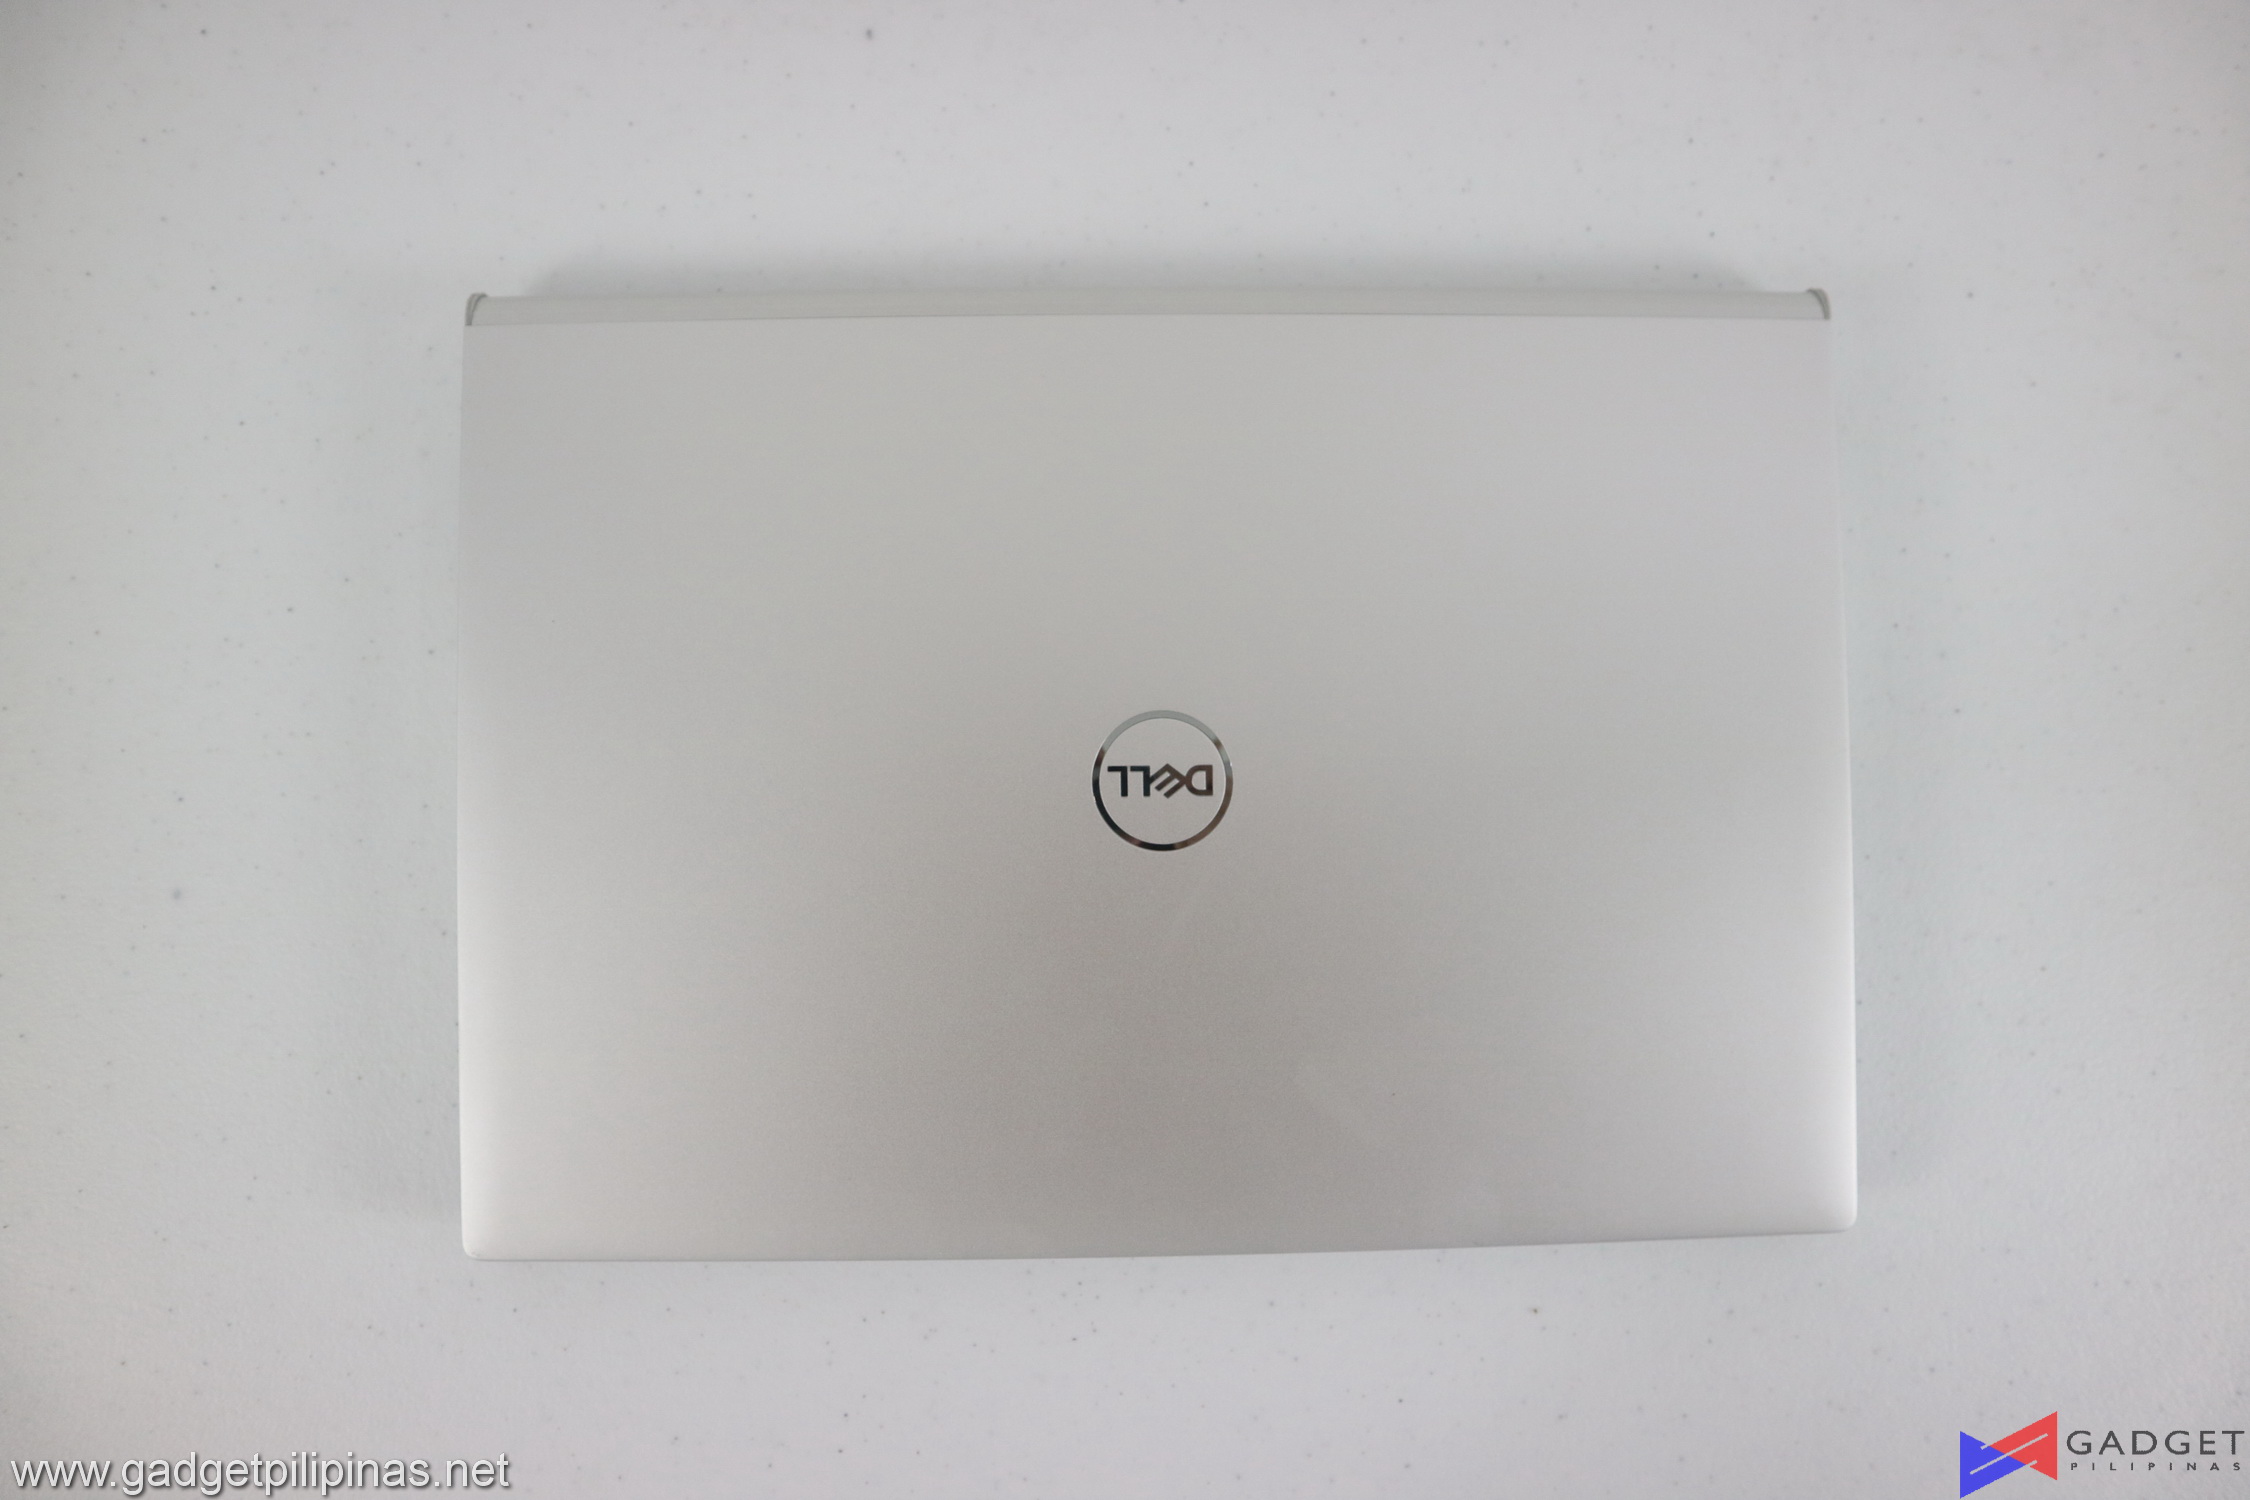 Dell Inspiron 14 7400 Review 01